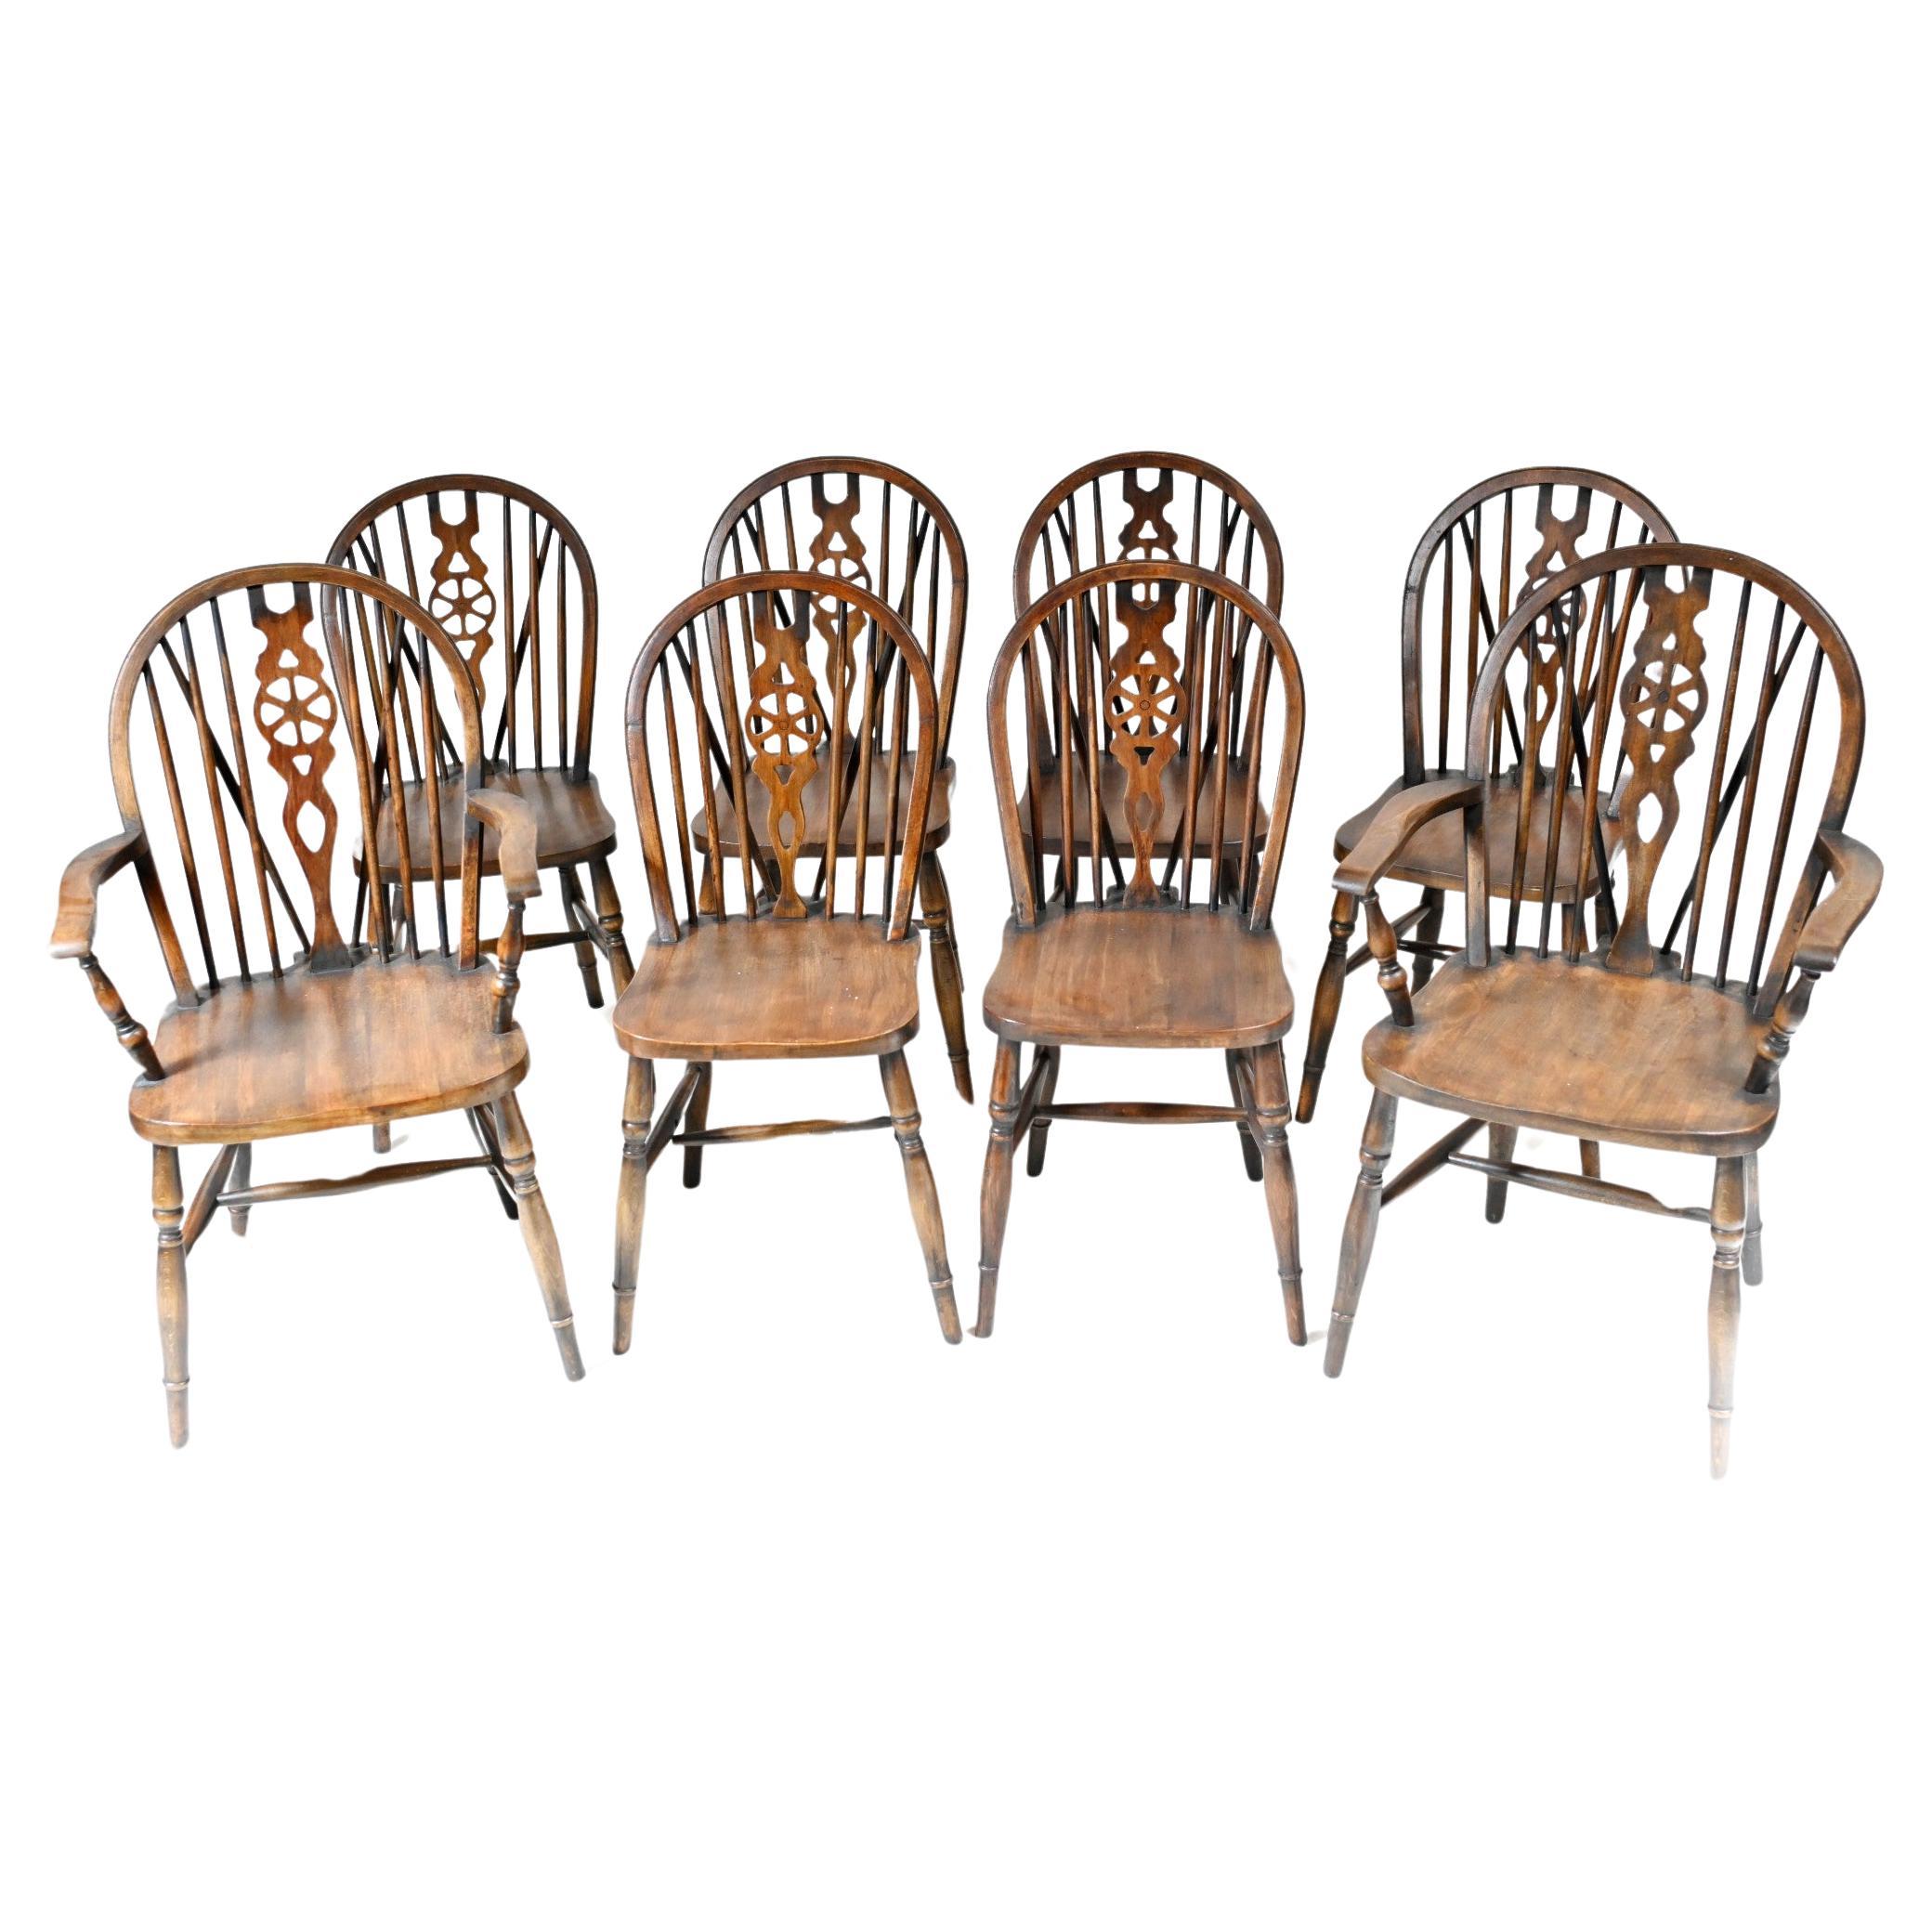 Set 8 Antique Windsor Chairs Wheelback Kitchen Diners 1890